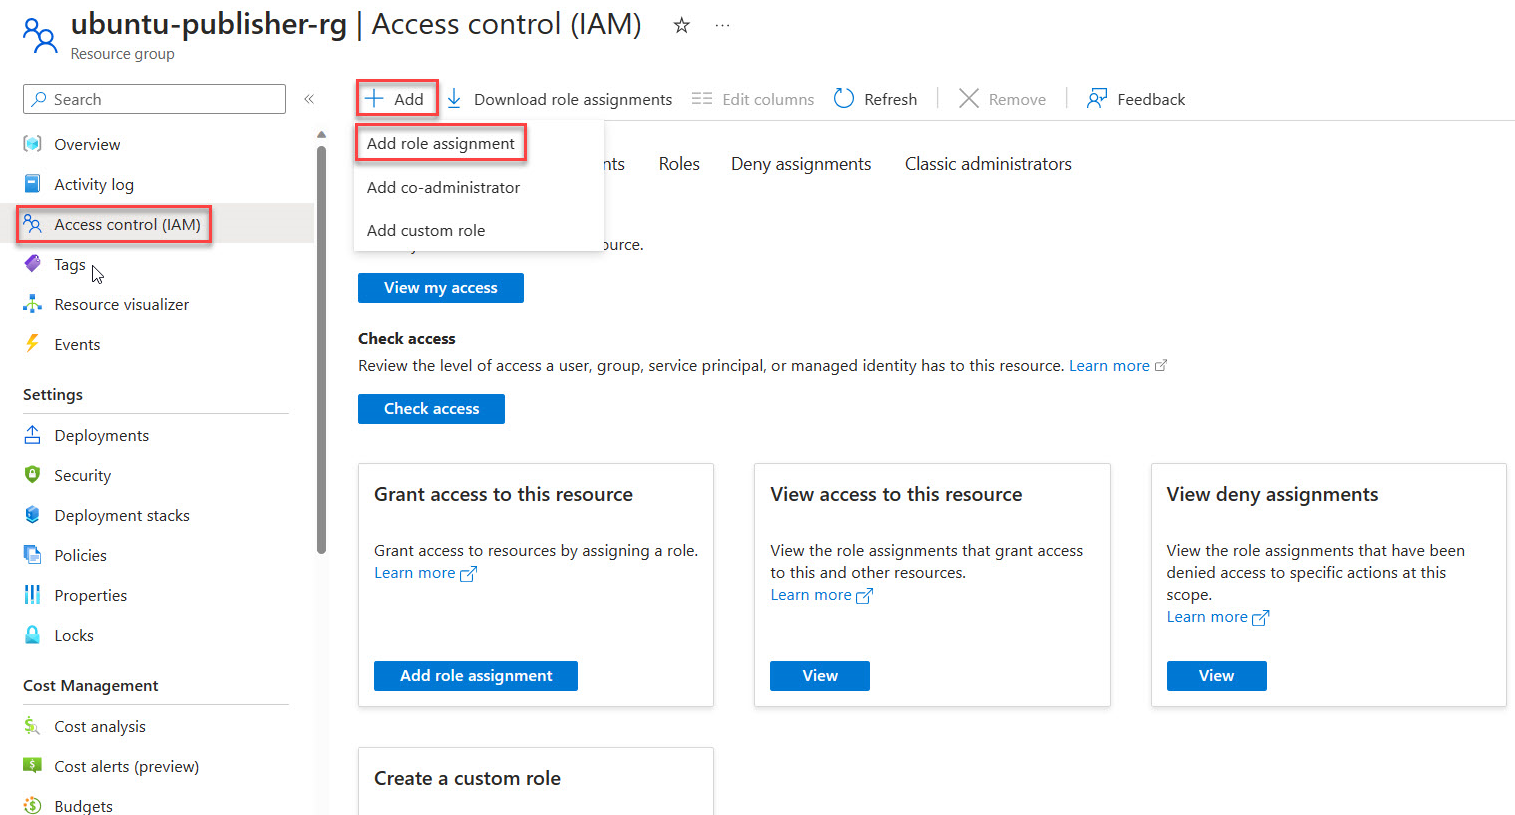 Screenshot showing the publisher resource group access control page.